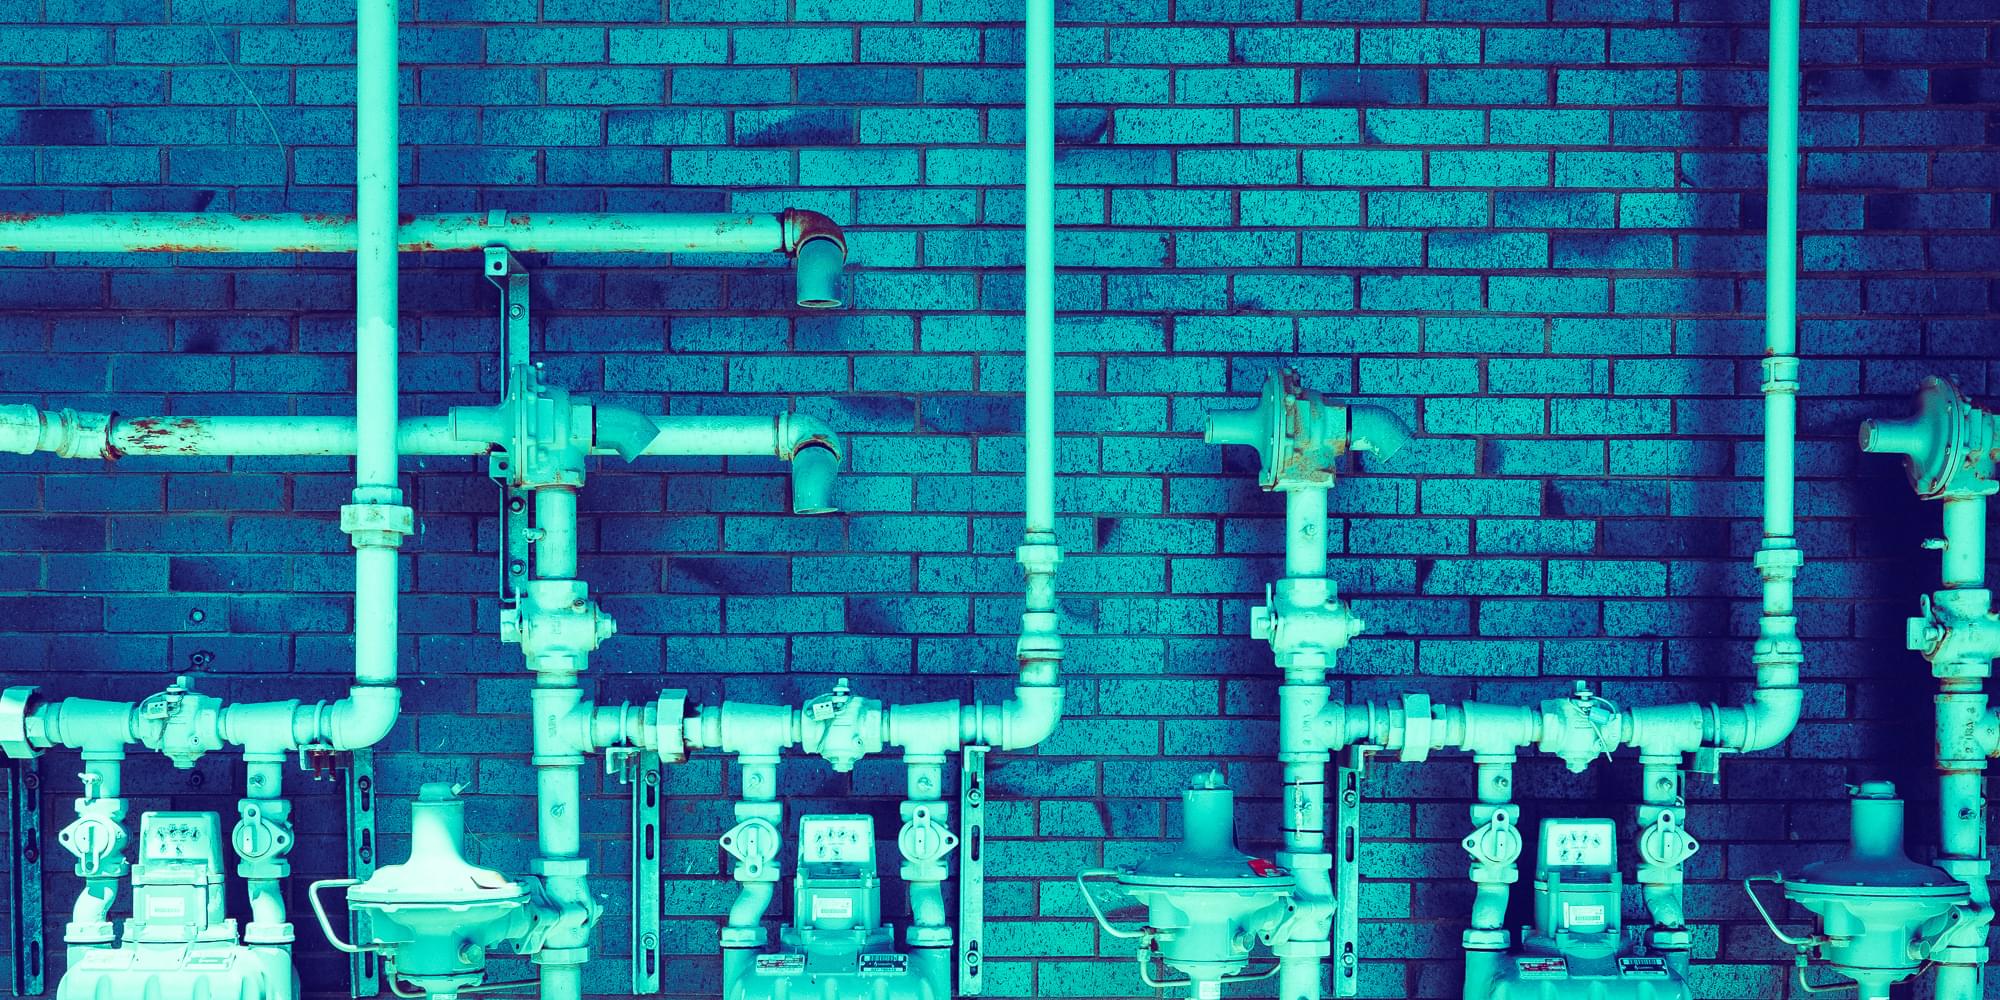 A photo of many interconnecting pipes against a backdrop of a brick wall. The photo is heavily tinted blue and cyan.